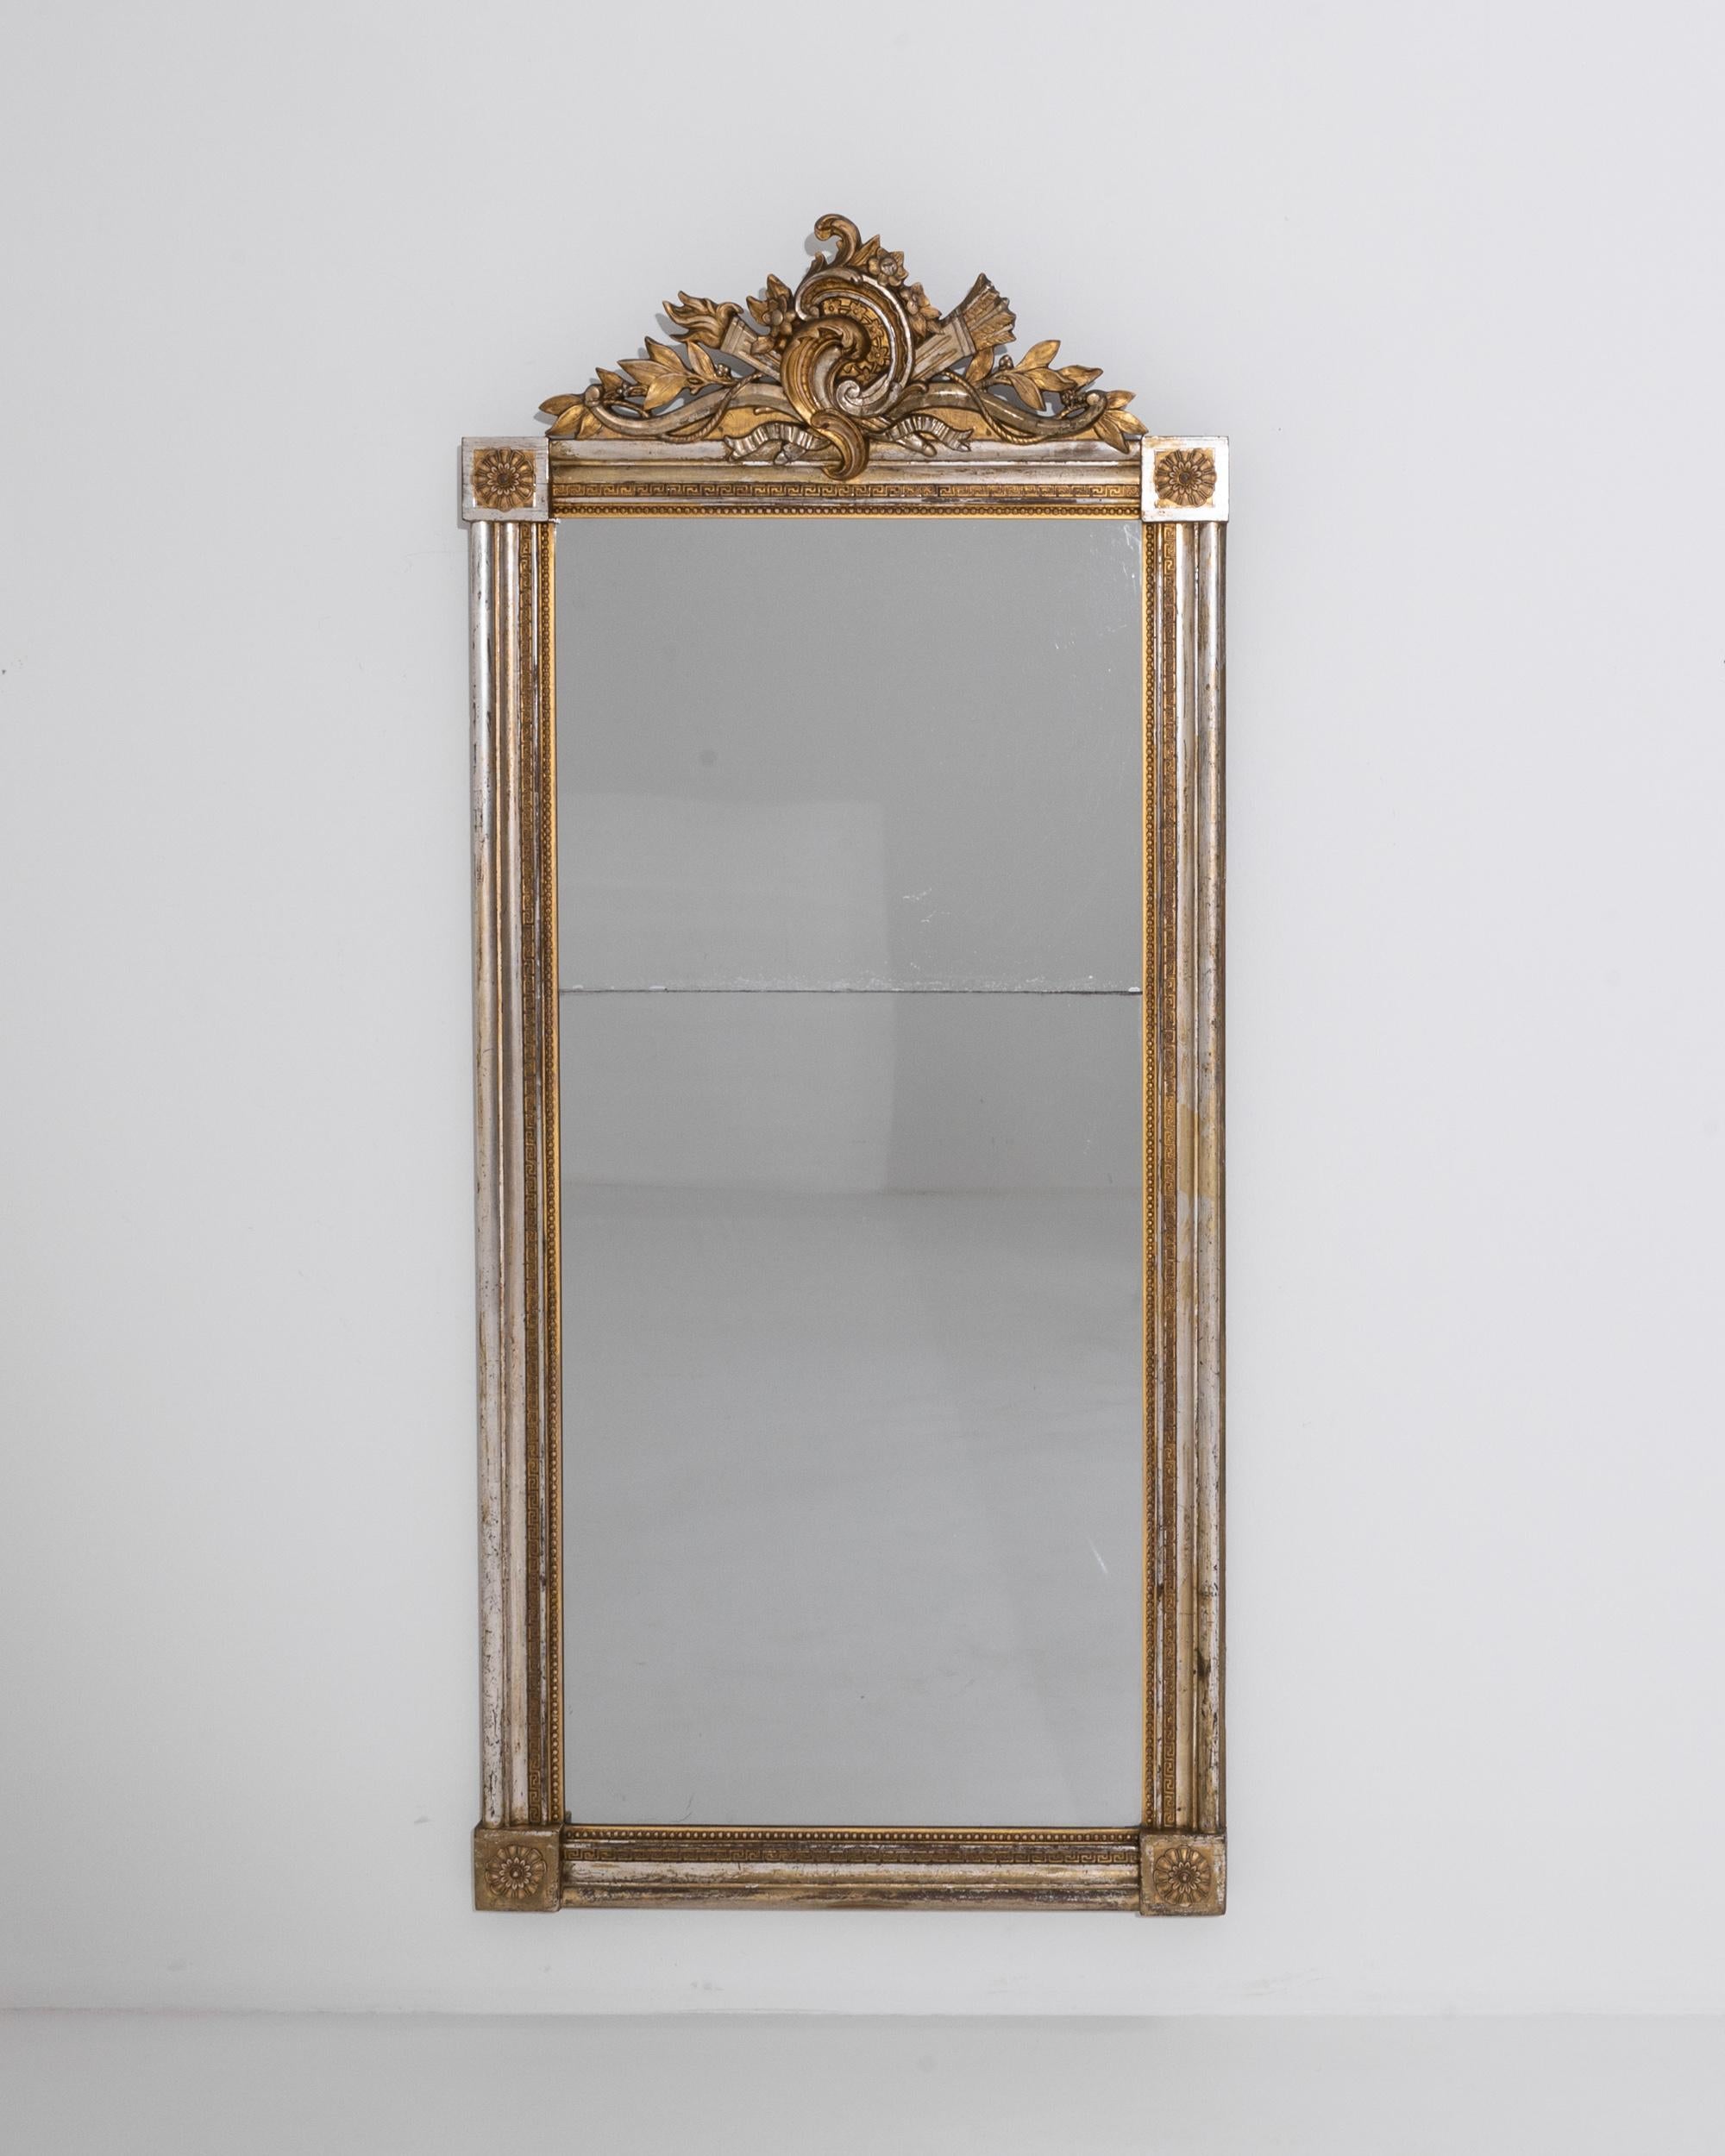 A 19th century gilded wooden mirror produced in France, this ornate piece exudes a sensual baroque inflection. Decorated with fretwork friezes and daintily carved pearl strings, the frame offers an opulent contrast of gilded and silver finishes.